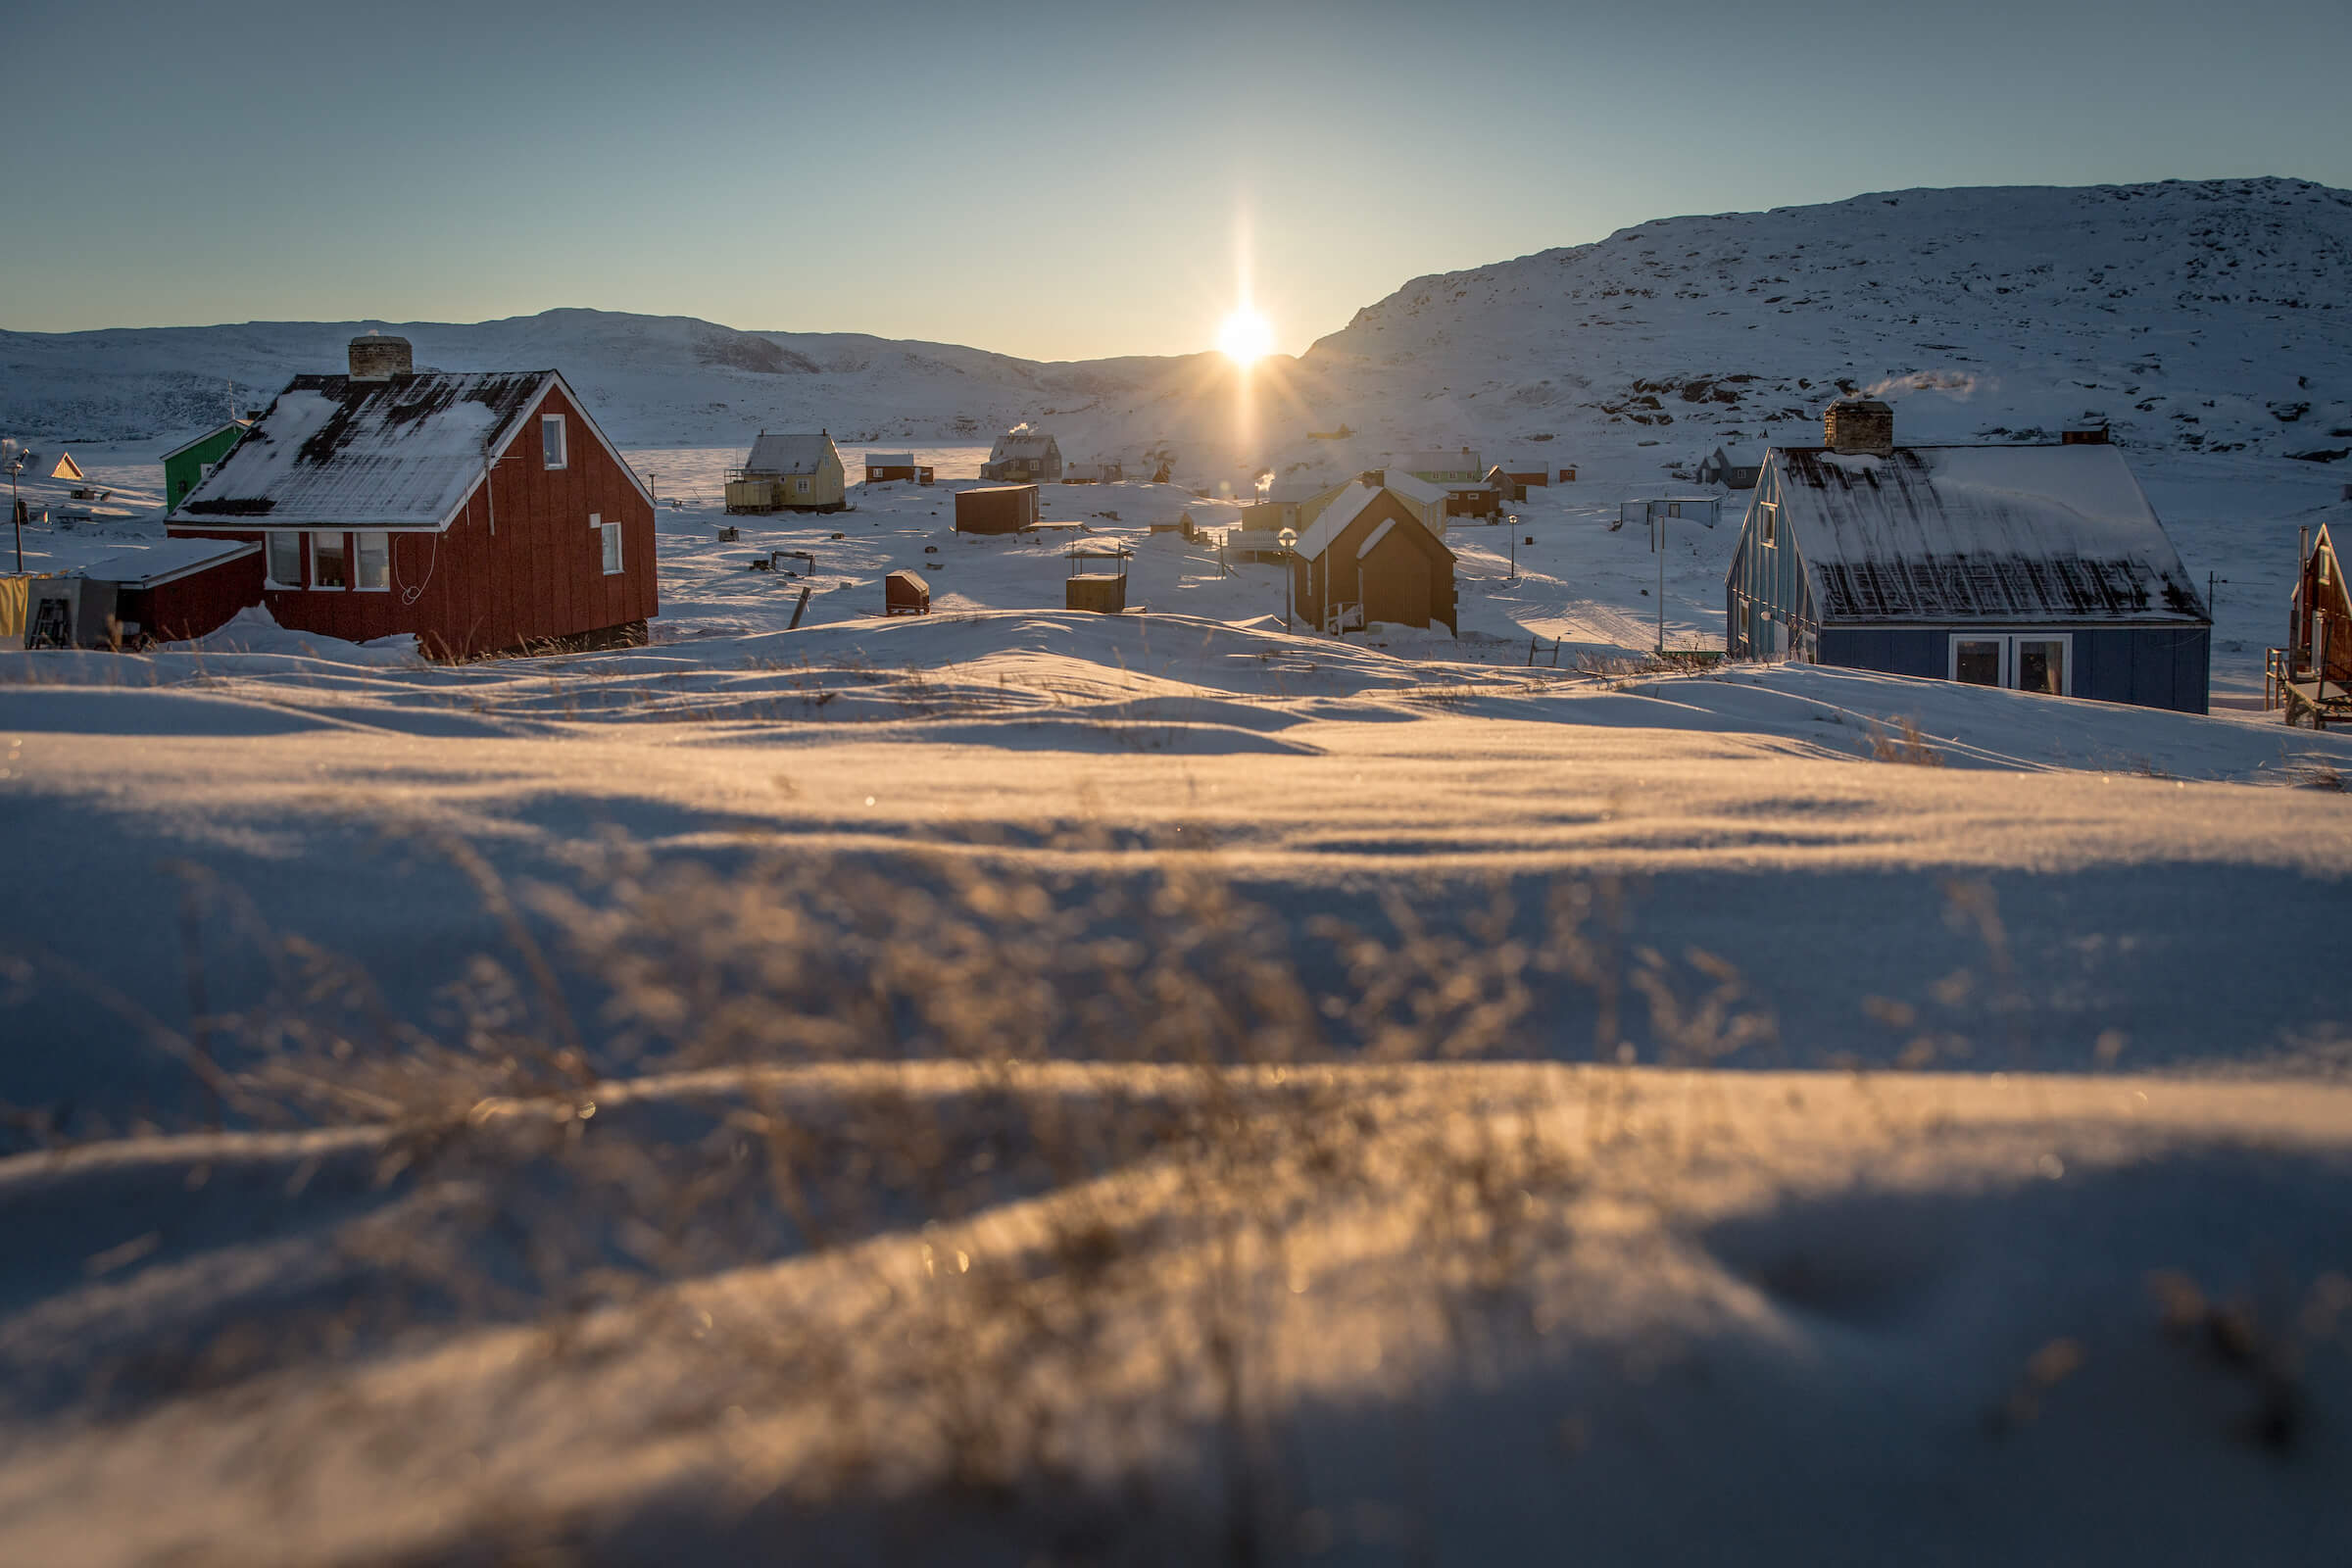 Sunrise over the village Oqaatsut in North Greenland near Ilulissat in the Disko Bay. Photo by Mads Pihl - Visit Greenland